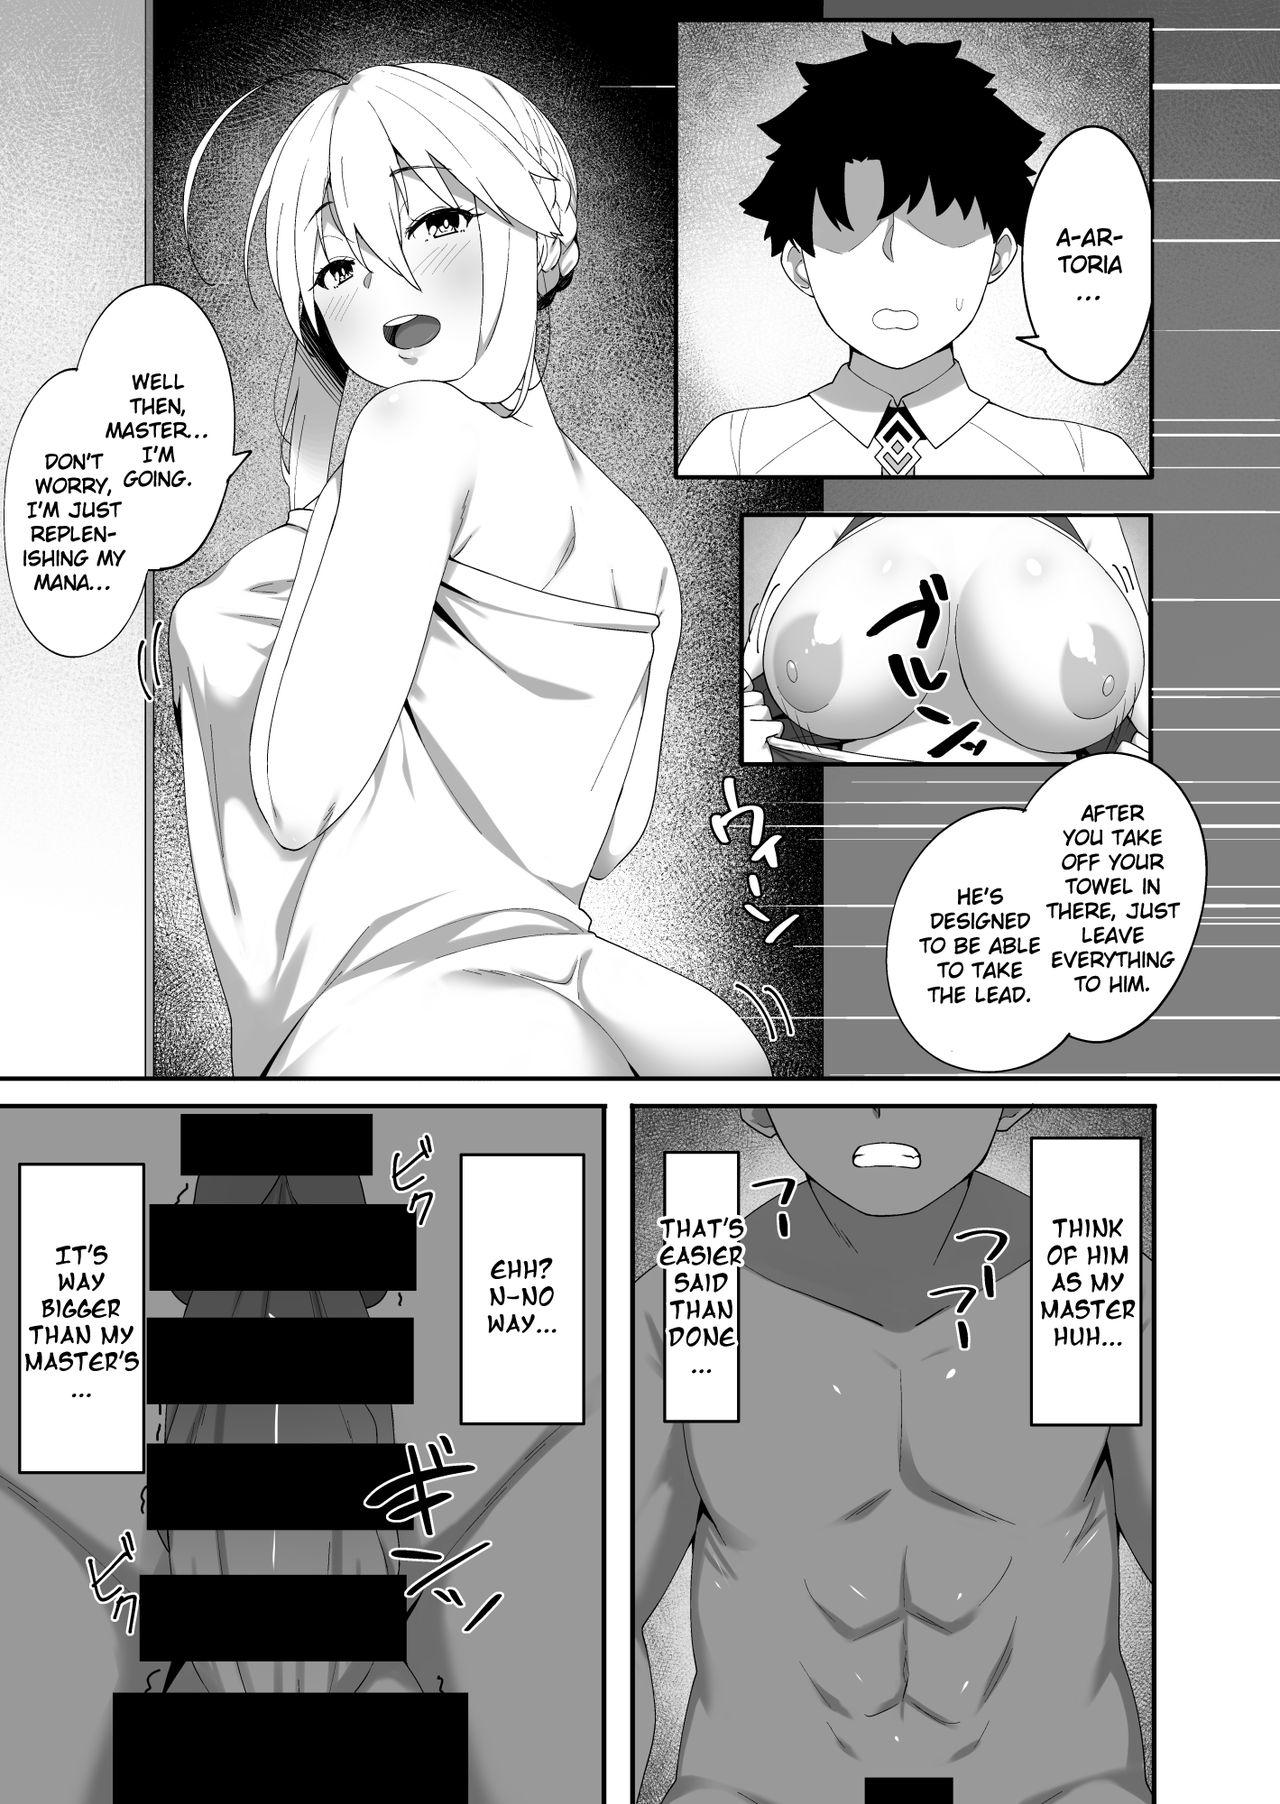 Realamateur Kabe no Mukou de Kimi ga Naku 2 | Crying Out From The Other Side Of The Wall 2 - Fate grand order Gaybukkake - Page 4